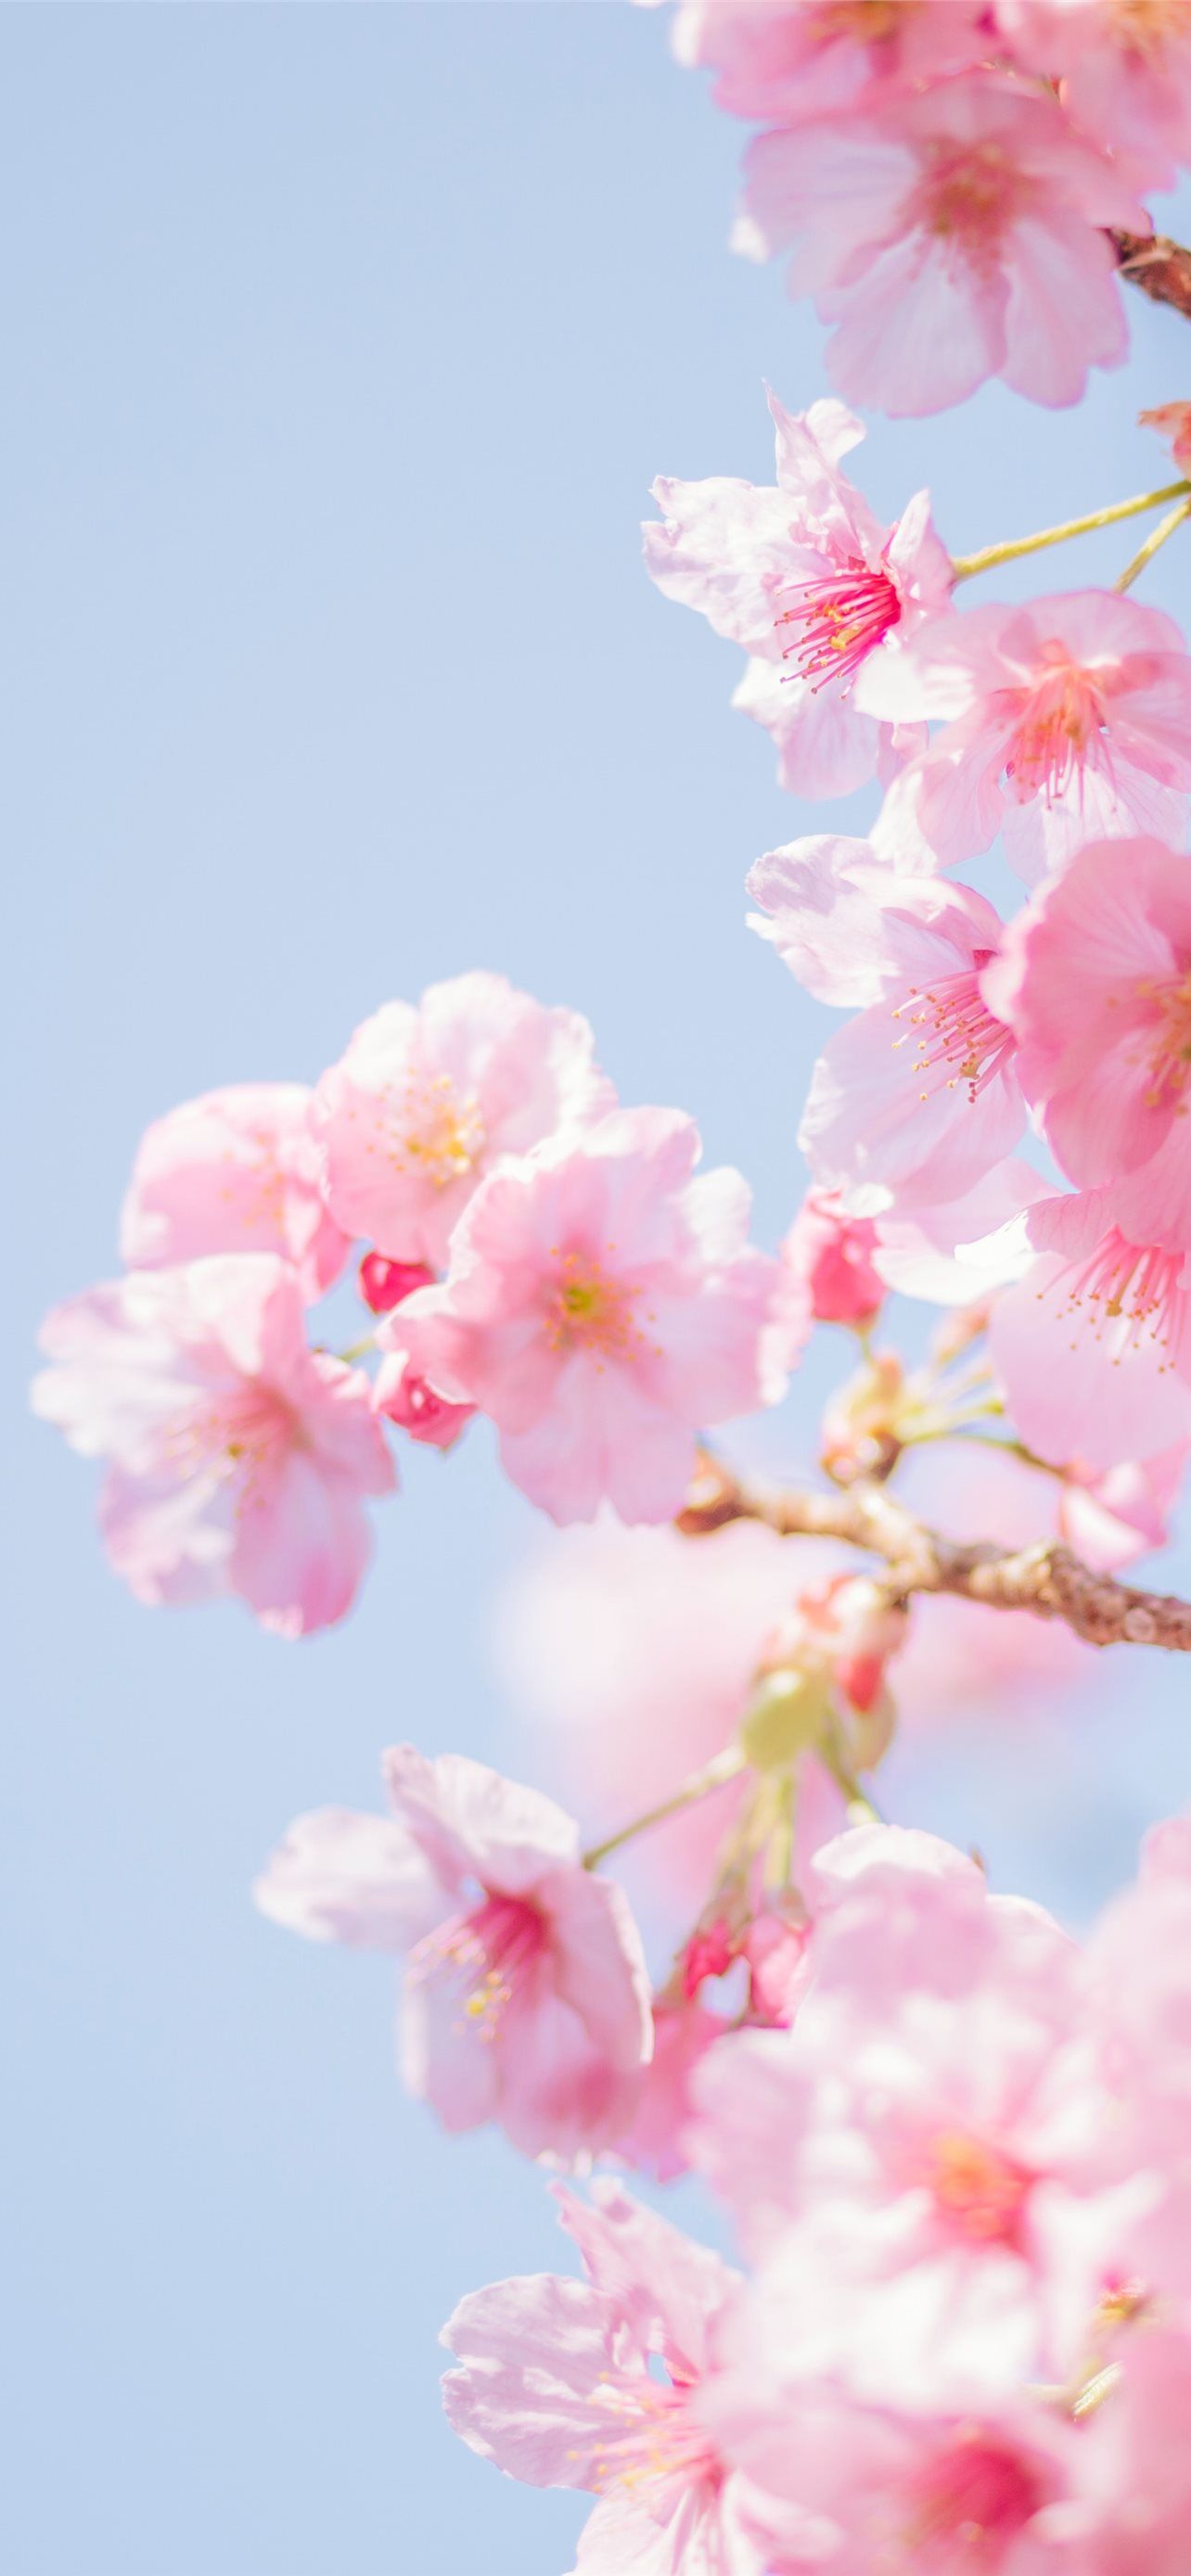 A branch of cherry blossoms against a blue sky - Spring